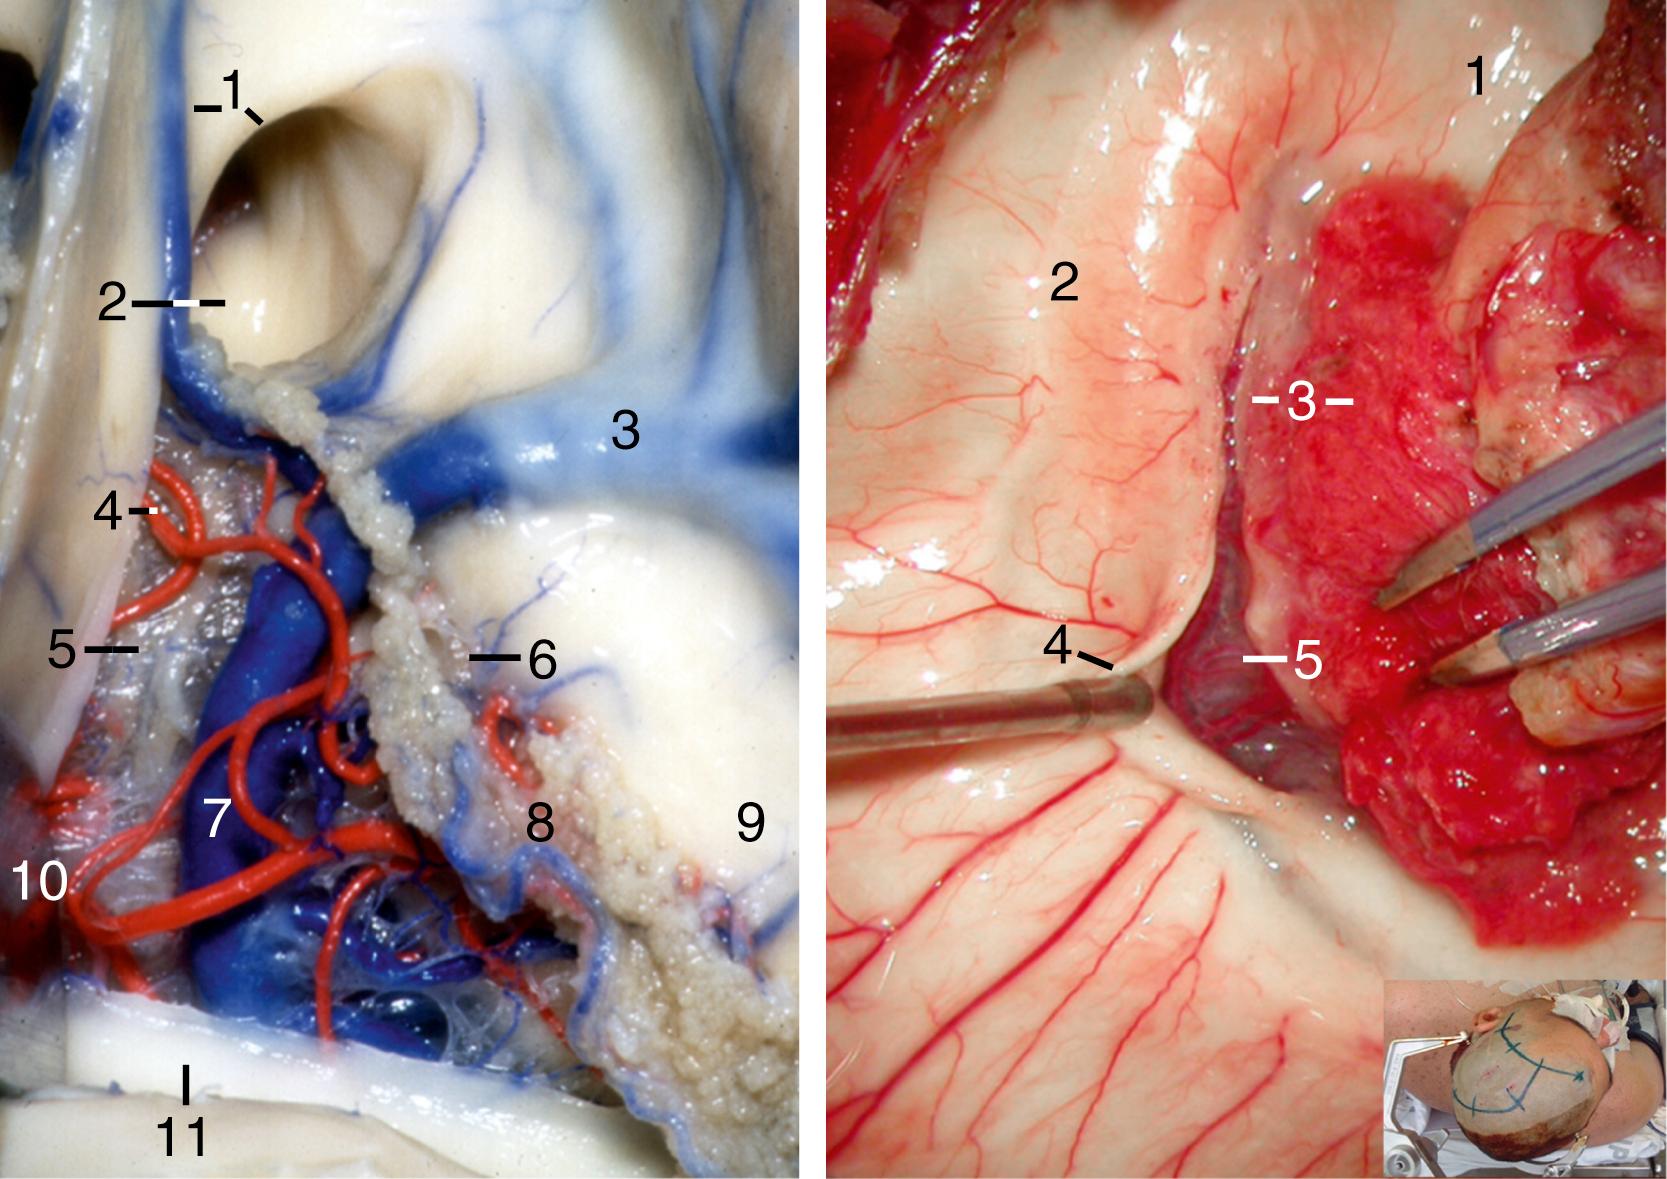 Figure 2.13, Left, The body of fornix has been retracted medially by splitting the choroidal fissure through the taenia fornicis, and the superior membrane of tela choroidea has been removed to display the contents of velum interpositum. 1, Anterior septal vein and column of fornix; 2, foramen of Monro; 3, thalamostriate vein; 4, branch of medial posterior choroidal artery; 5, inferior membrane of tela choroidea; 6, taenia choroidea; 7, internal cerebral vein; 8, choroid plexus; 9, thalamus; 10, retractor; 11, body of fornix. Right, Surgical photograph; superior view of the left temporal horn and atrium. 1, Head of hippocampus; 2, body of hippocampus; 3, choroid plexus and taenia fimbriae (split); 4, fimbria of fornix; 5, arachnoid membrane of hippocampal sulcus, hippocampal artery branches, and transverse hippocampal veins. This route communicates the atrium to the ambient cistern. The inset displays the position of the head.